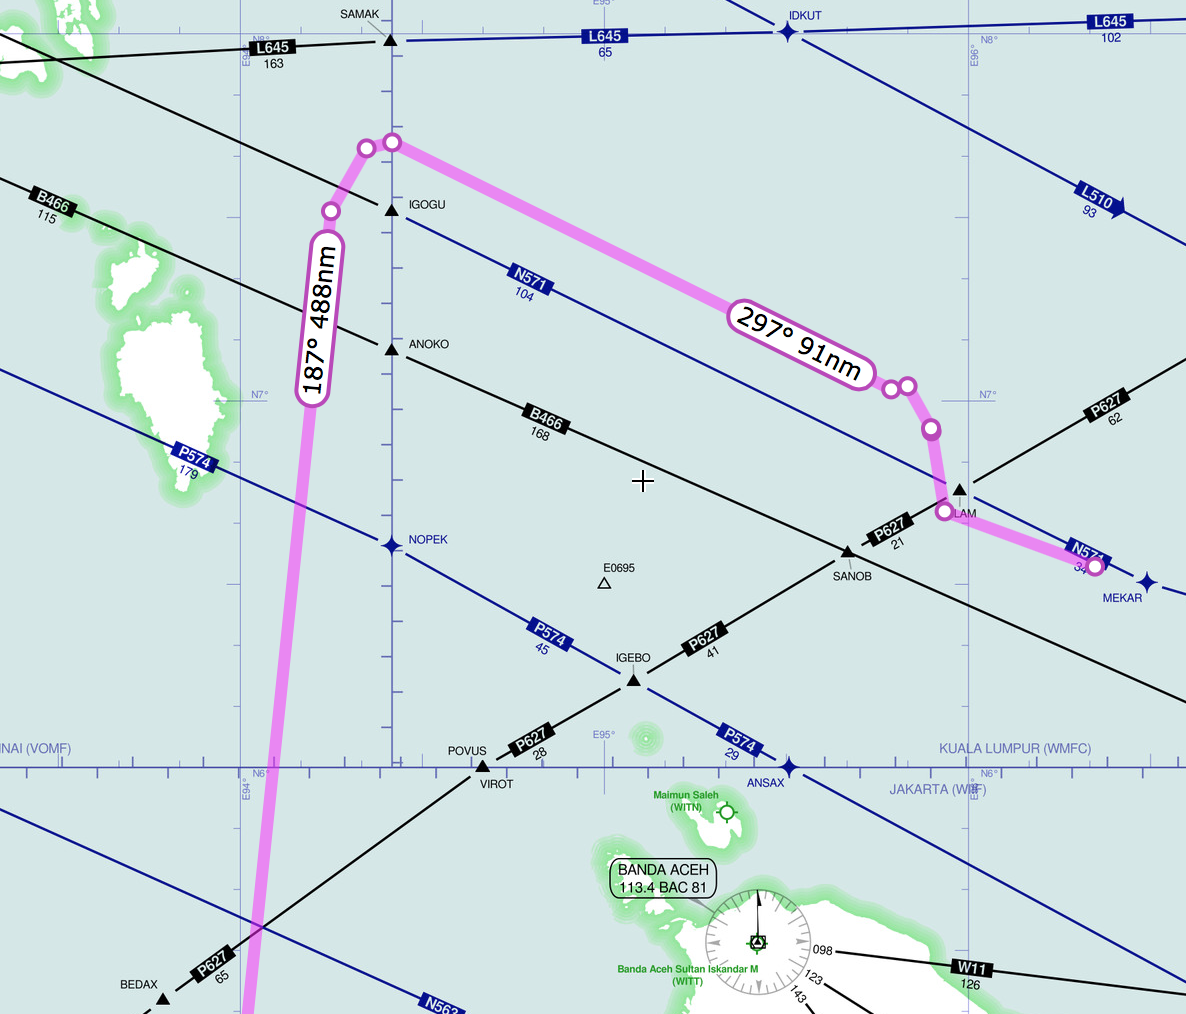 MH370-Flight-Path-Model-V13.5-Lateral-Of